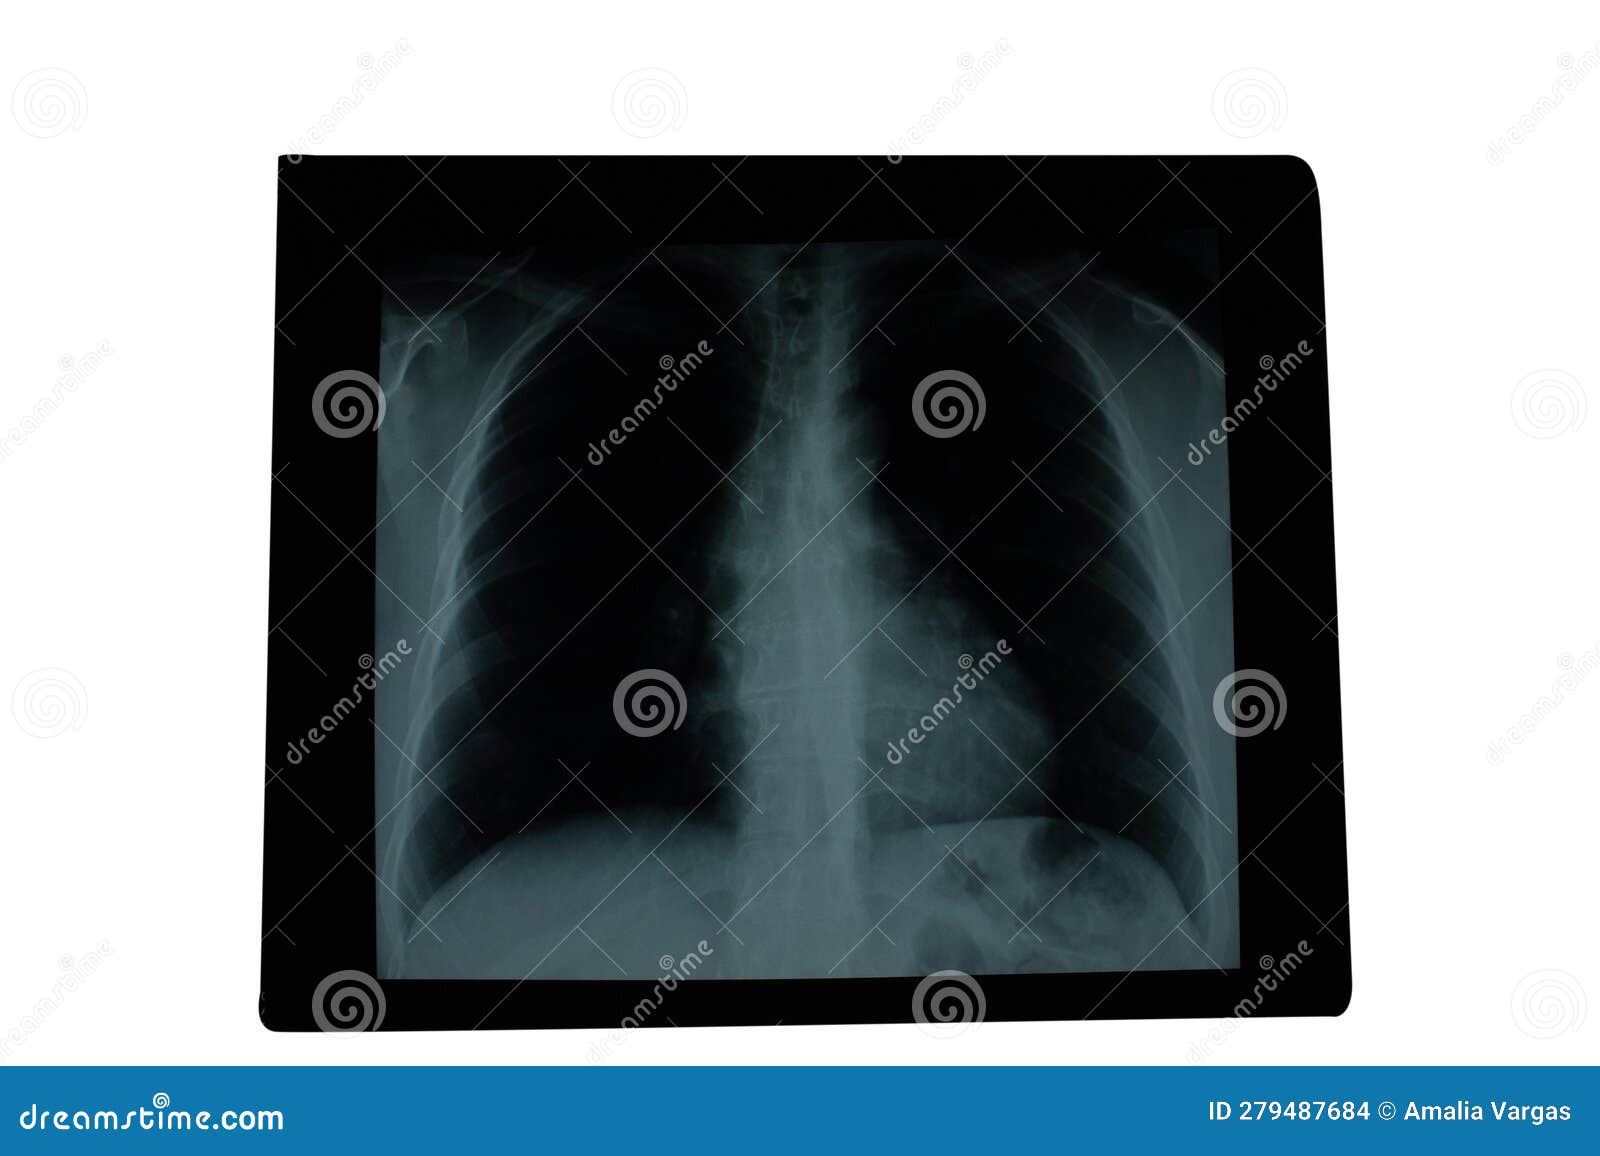 xray lungs radiological image of patient lung parenchyma homogeneous radiographic pattern and aortic button prominence